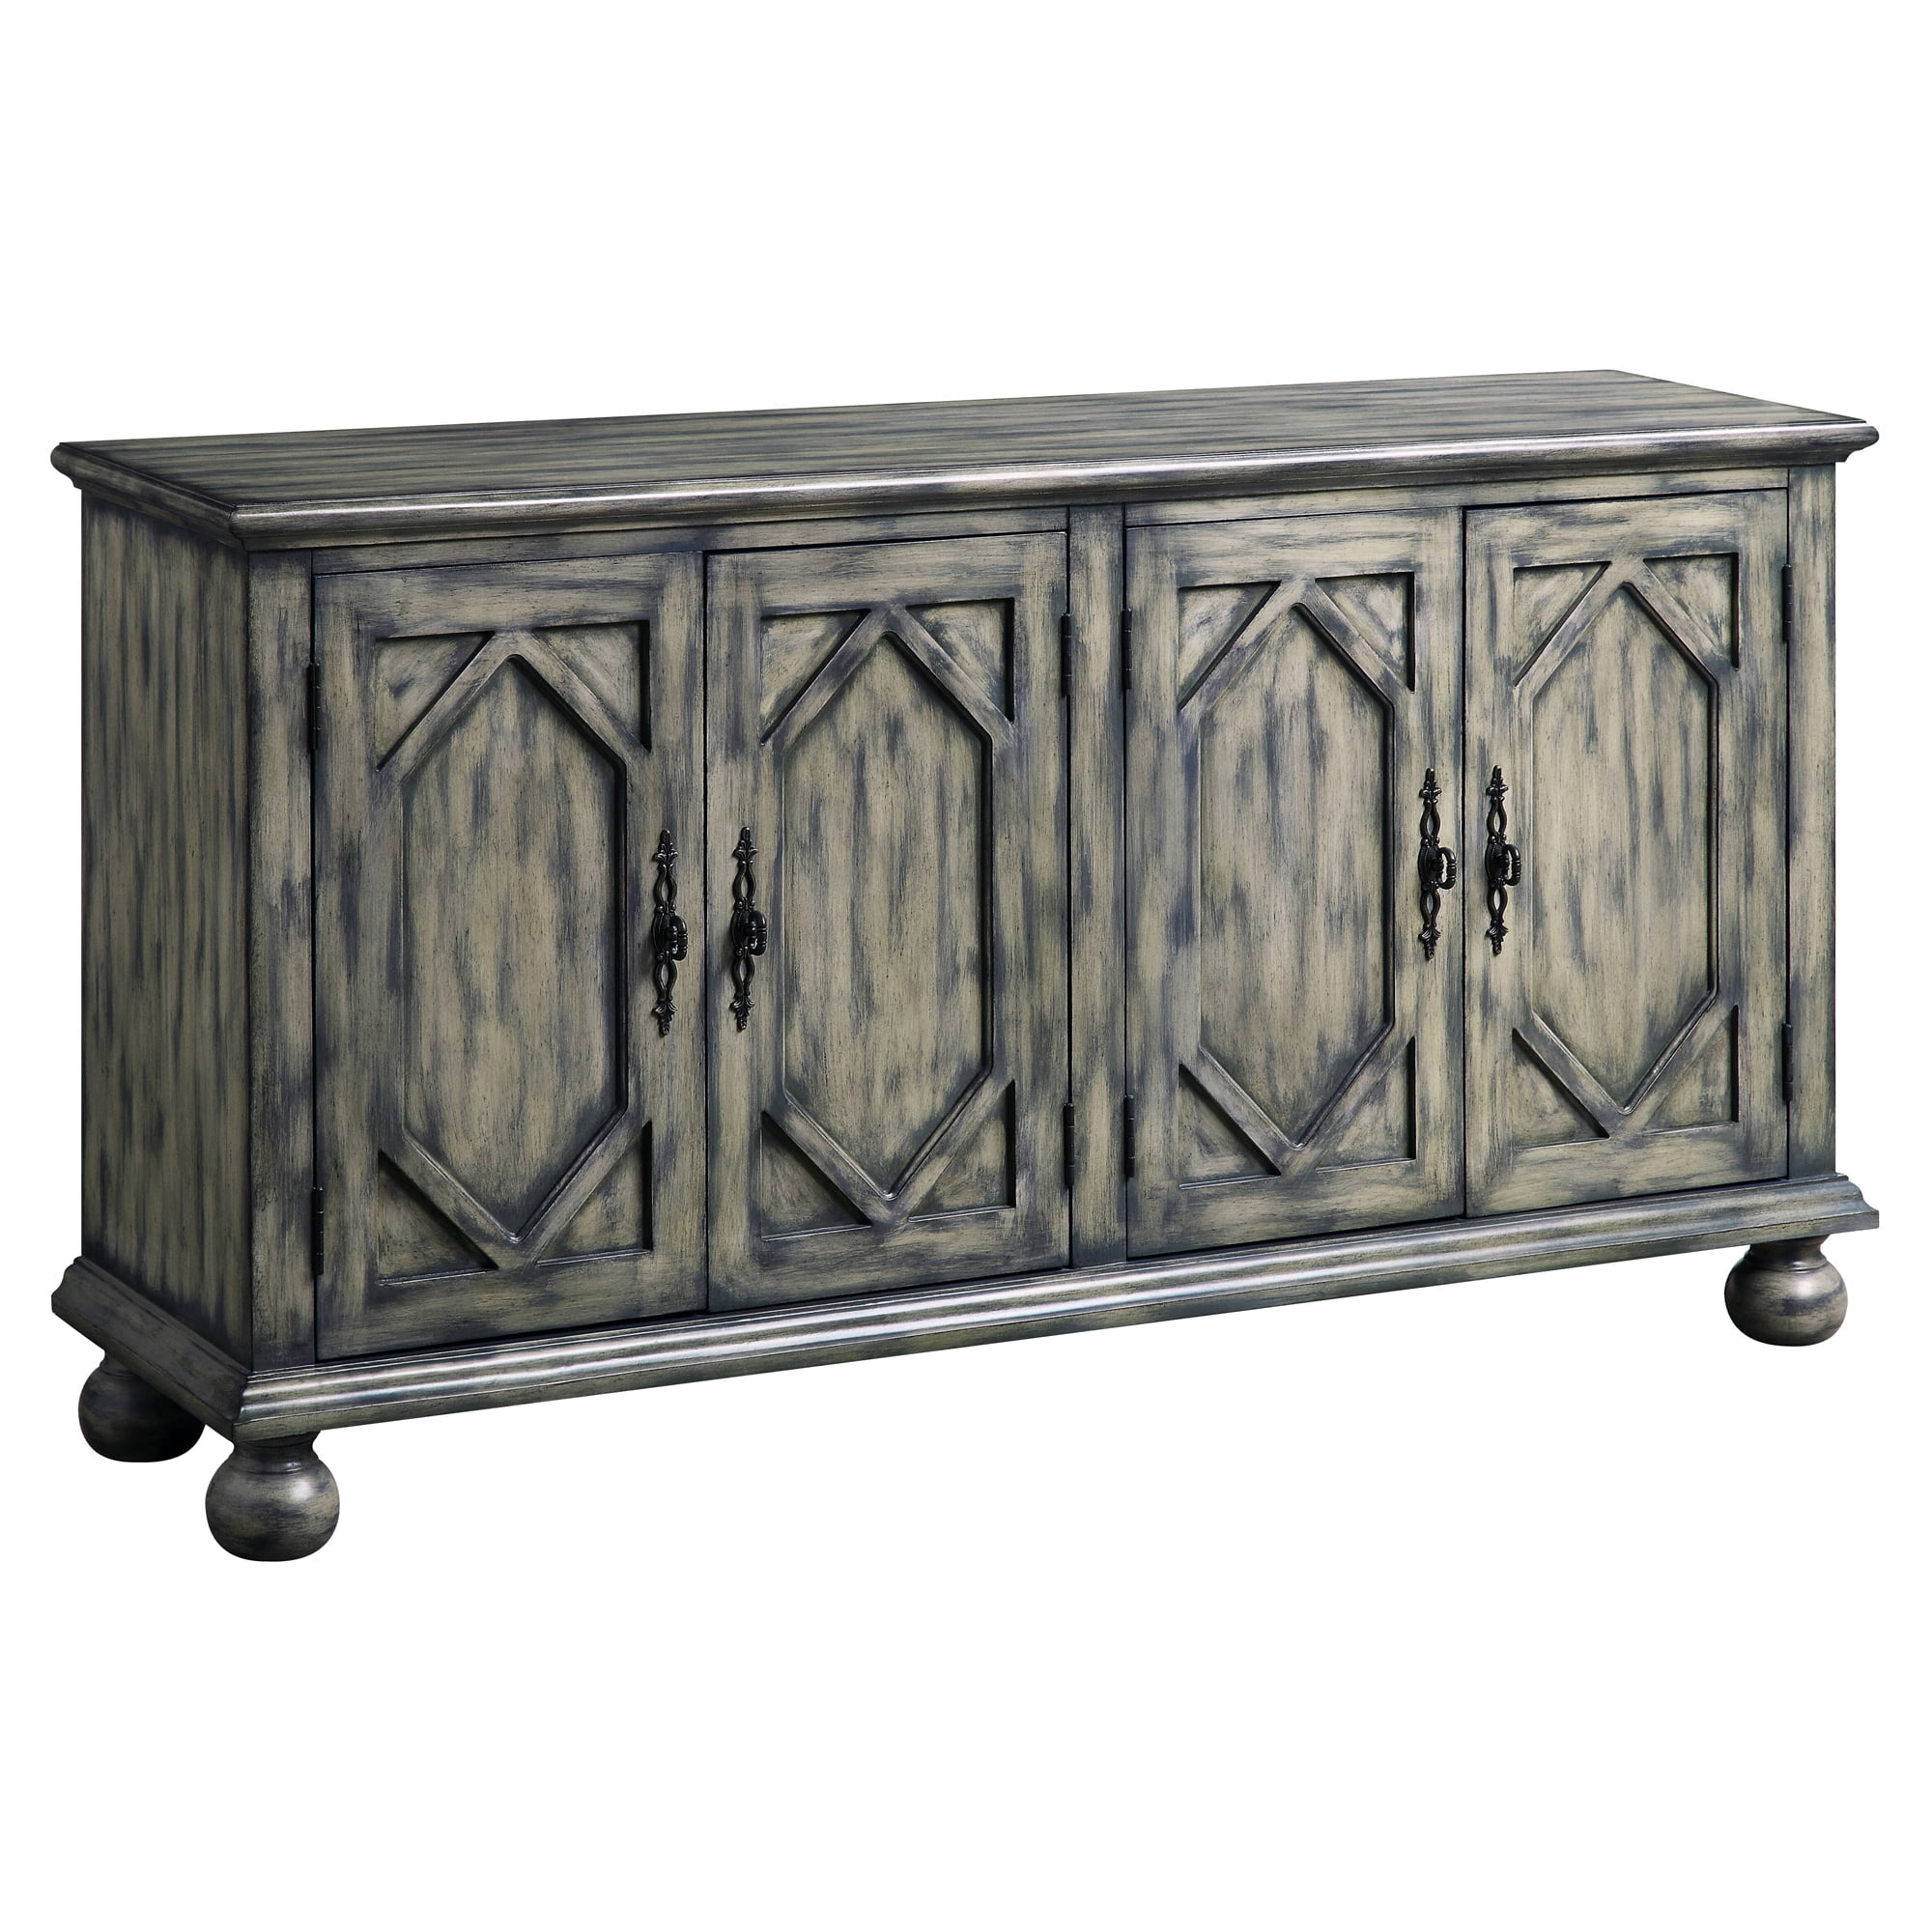 Picture of Acme Furniture AC00199 60 x 15 x 32 in. Pavan Console Table, Rustic Gray